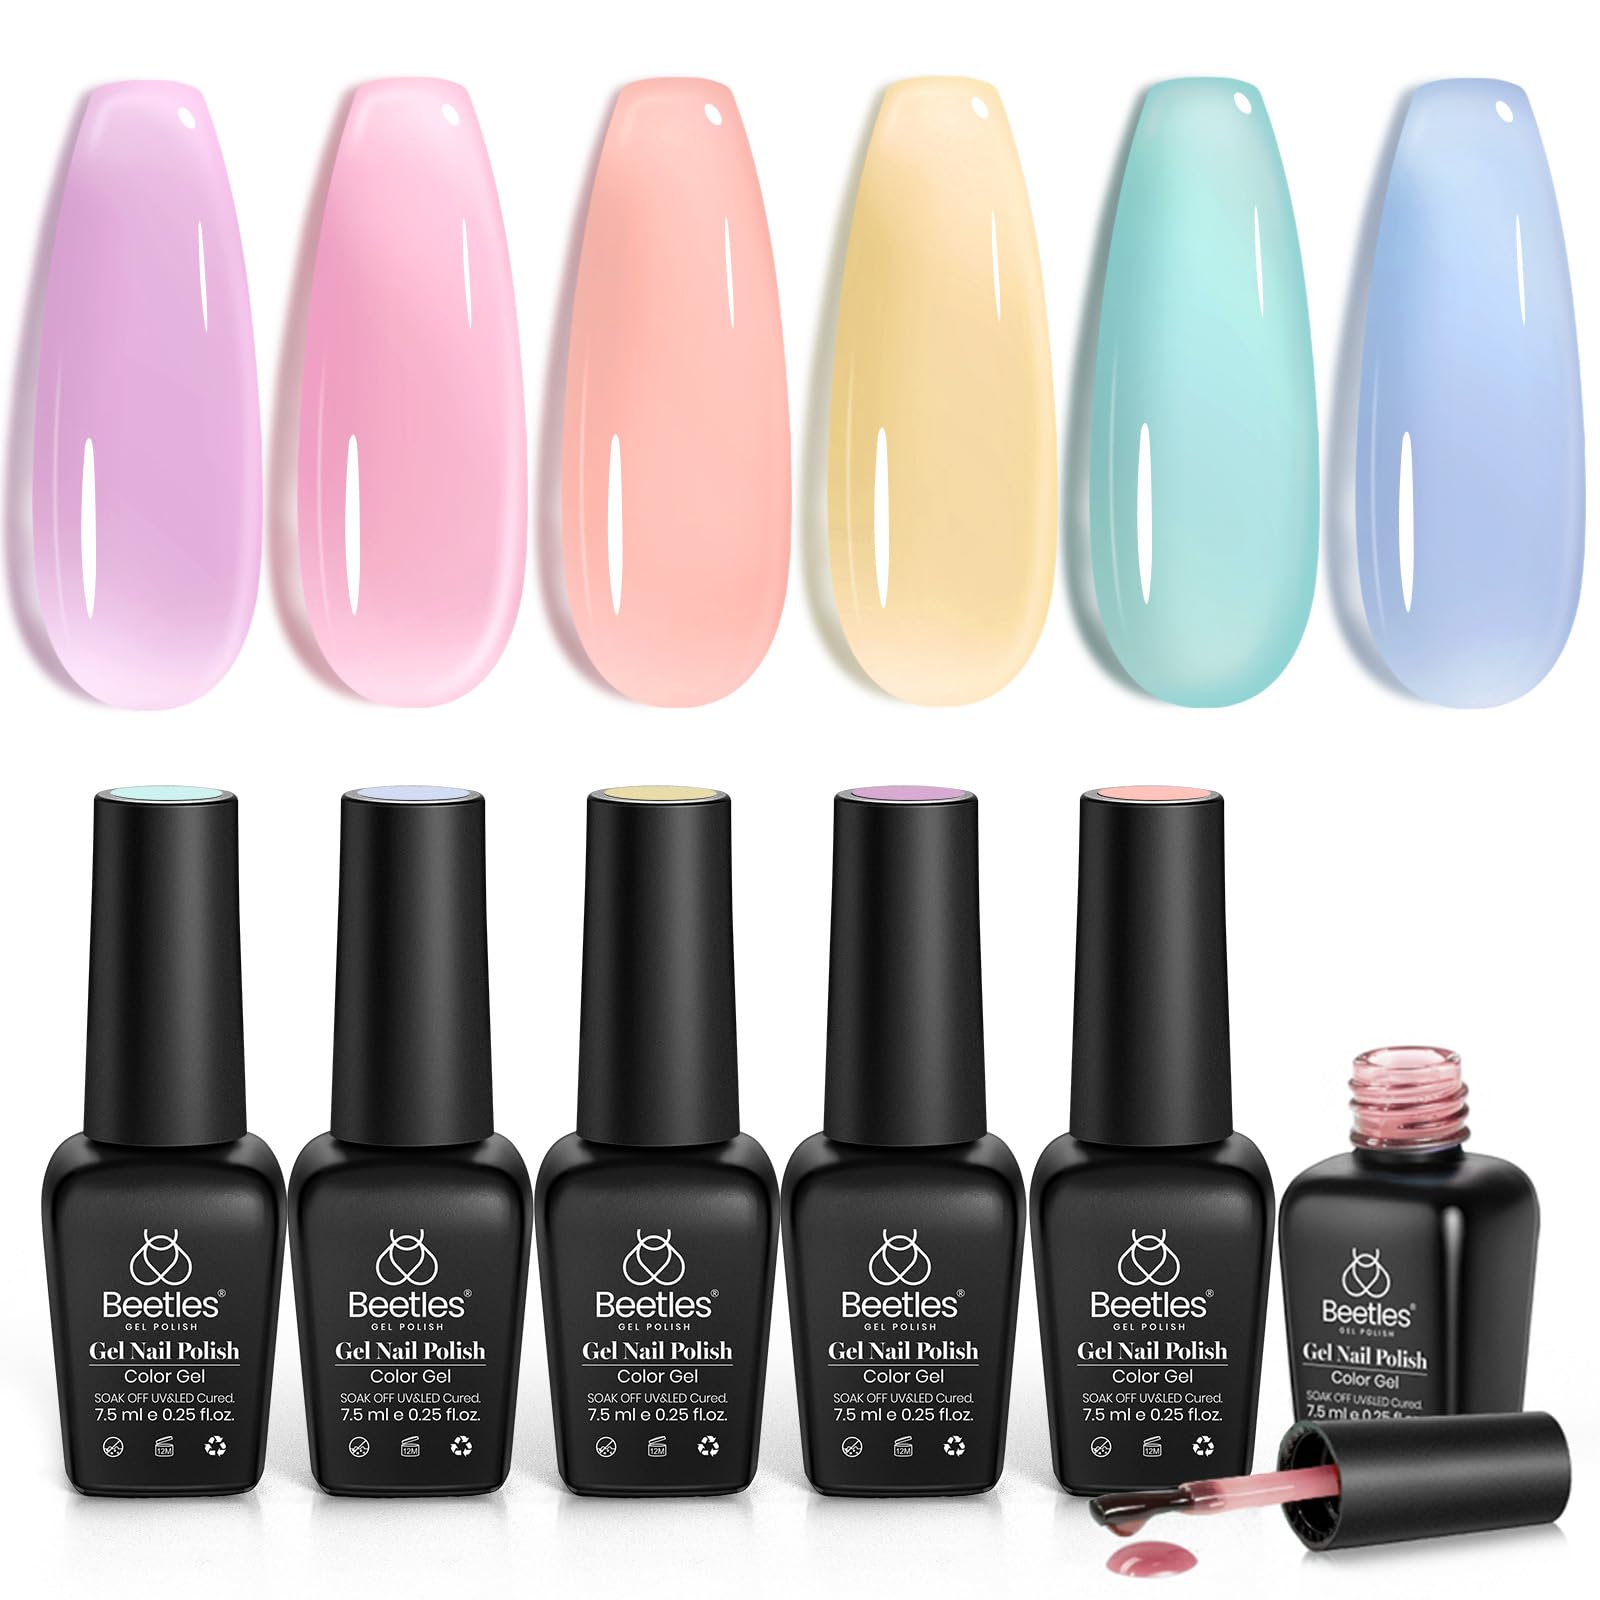 Candy Jelly | 6 Colors Gel Polish Set